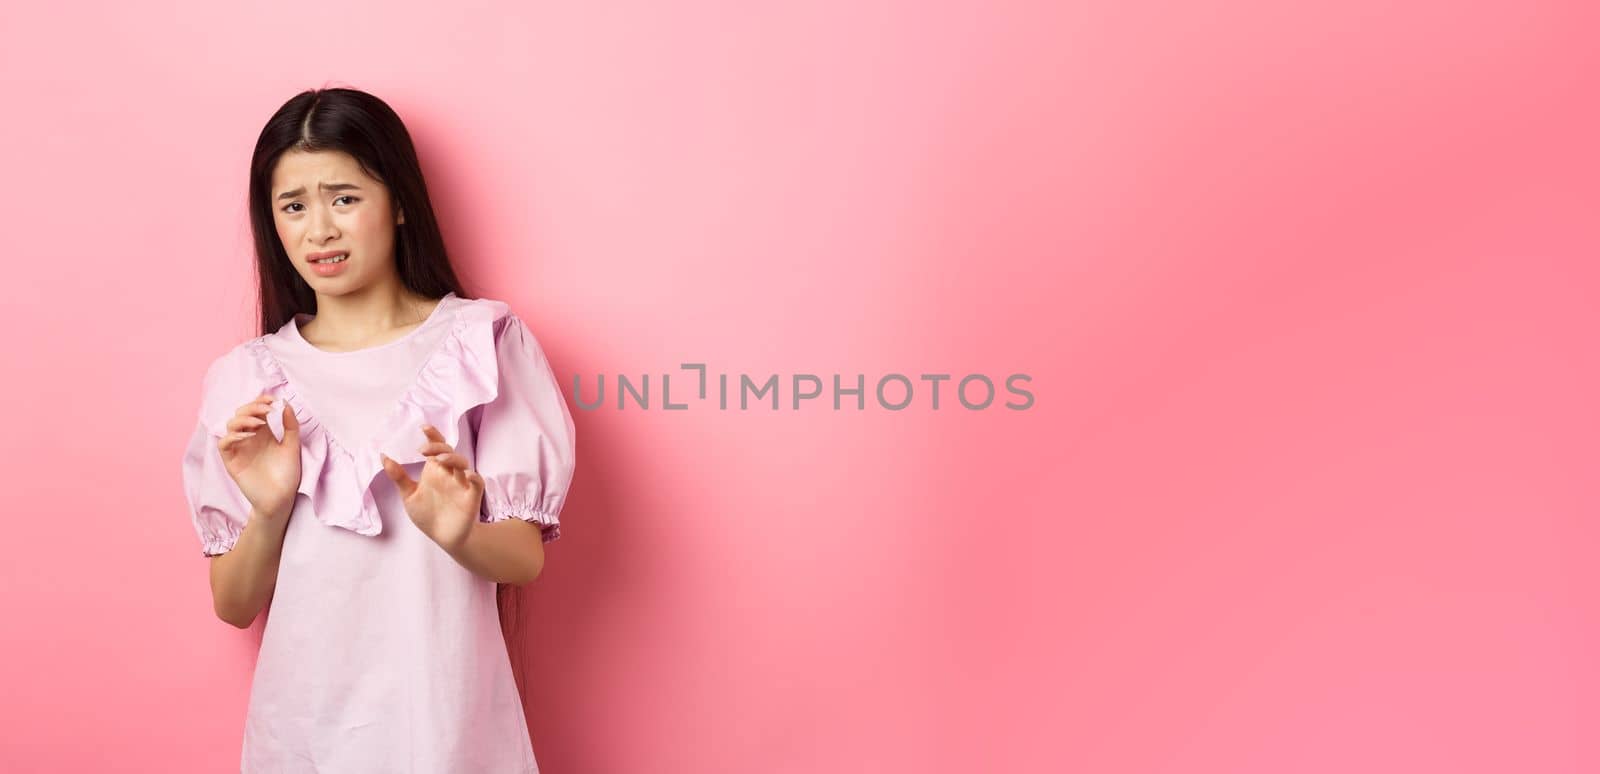 Stay away from me. Disgusted asian girl raising hands to block someone, cringe from aversion, look reluctant and asking to stop, rejecting something bad, pink background by Benzoix